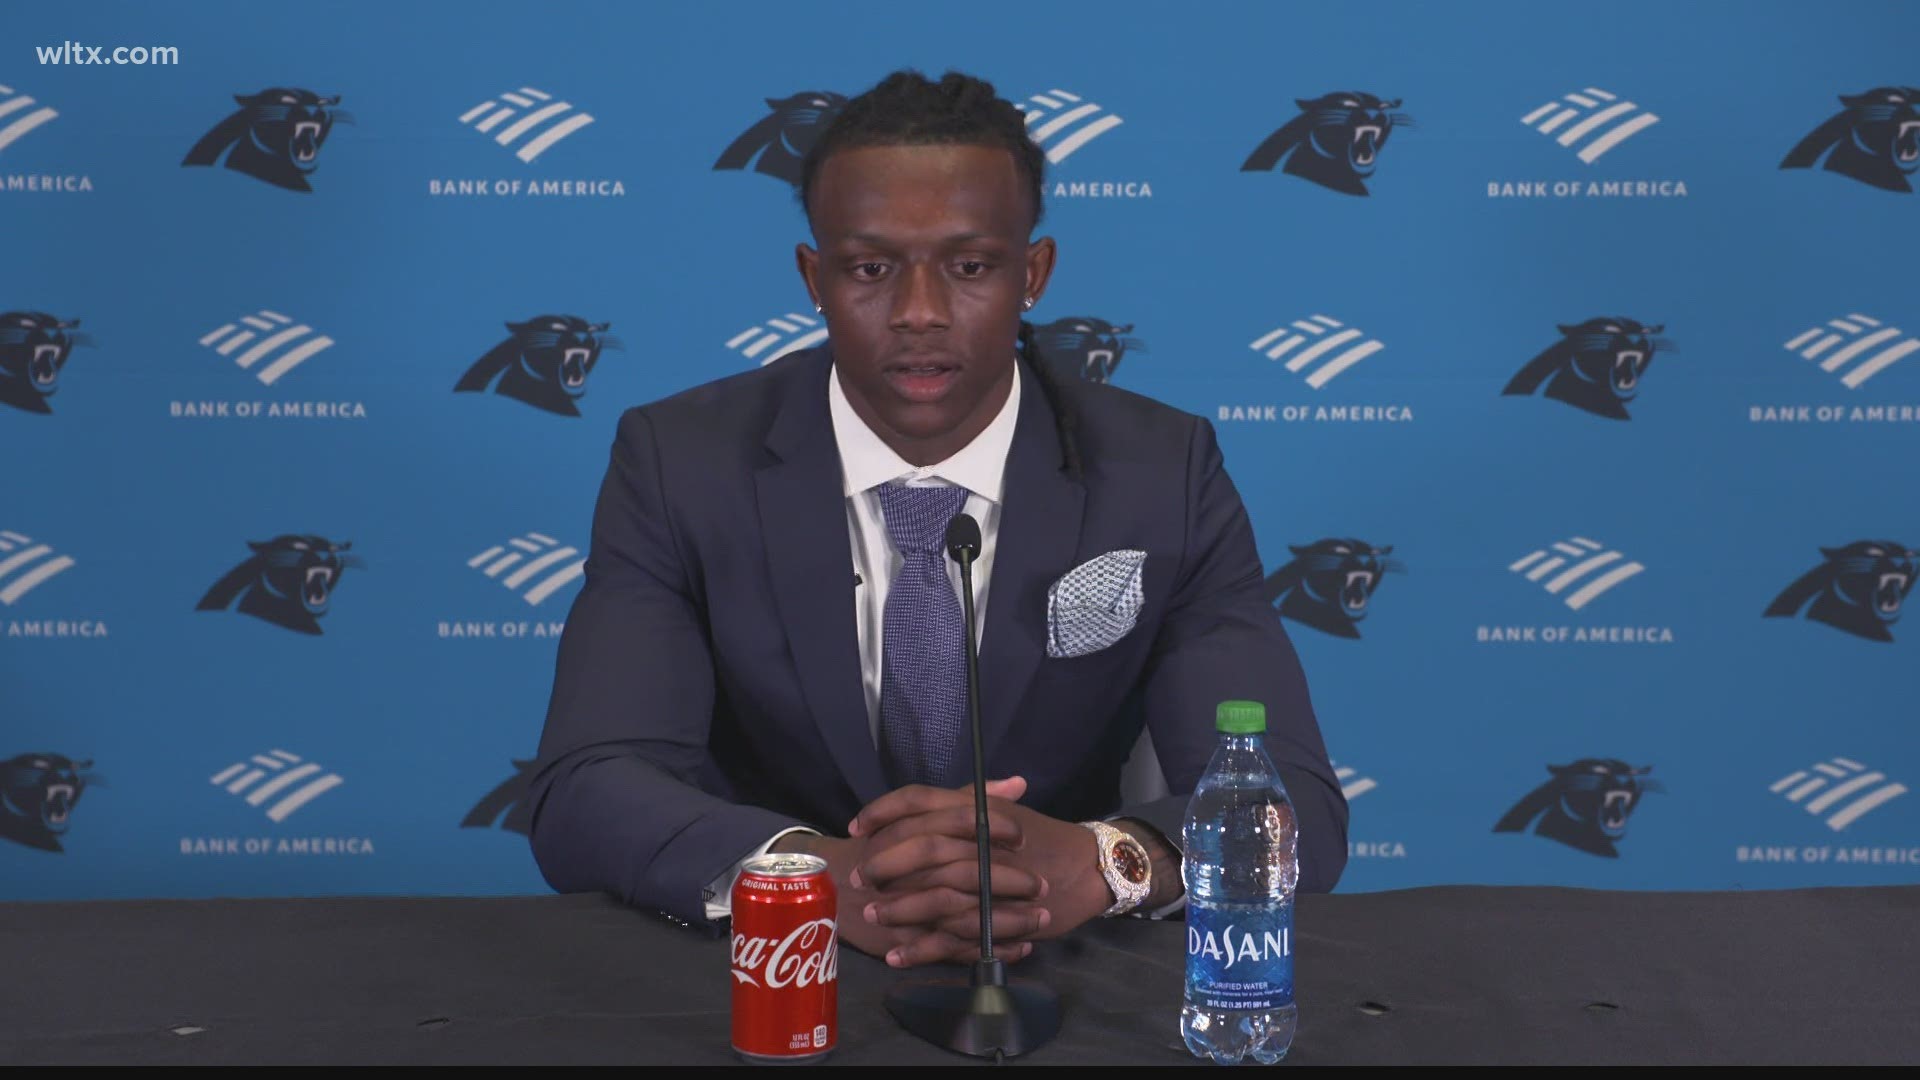 Former South Carolina cornerback Jaycee Horn met the media in Charlotte for the first time since being drafted by the Panthers in the first round.